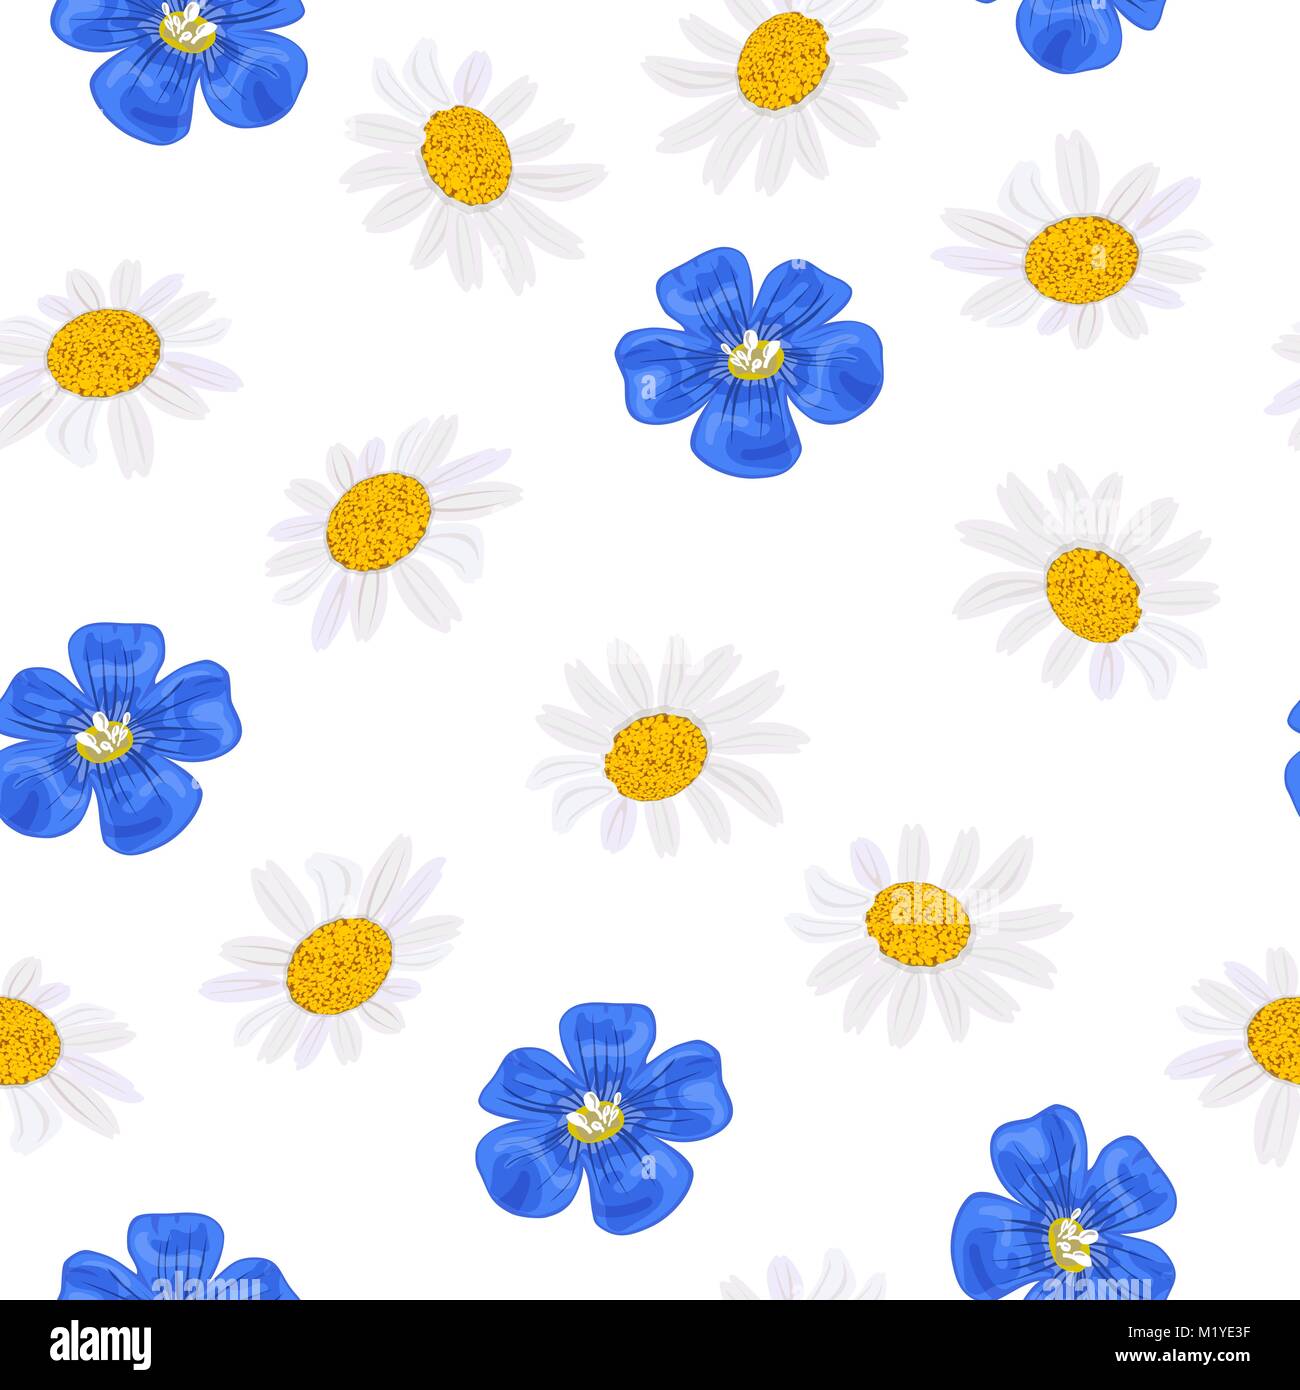 Daisy and forget-me-not, seamless pattern Vector. flax, chamomile wildflower heads. Stock Vector